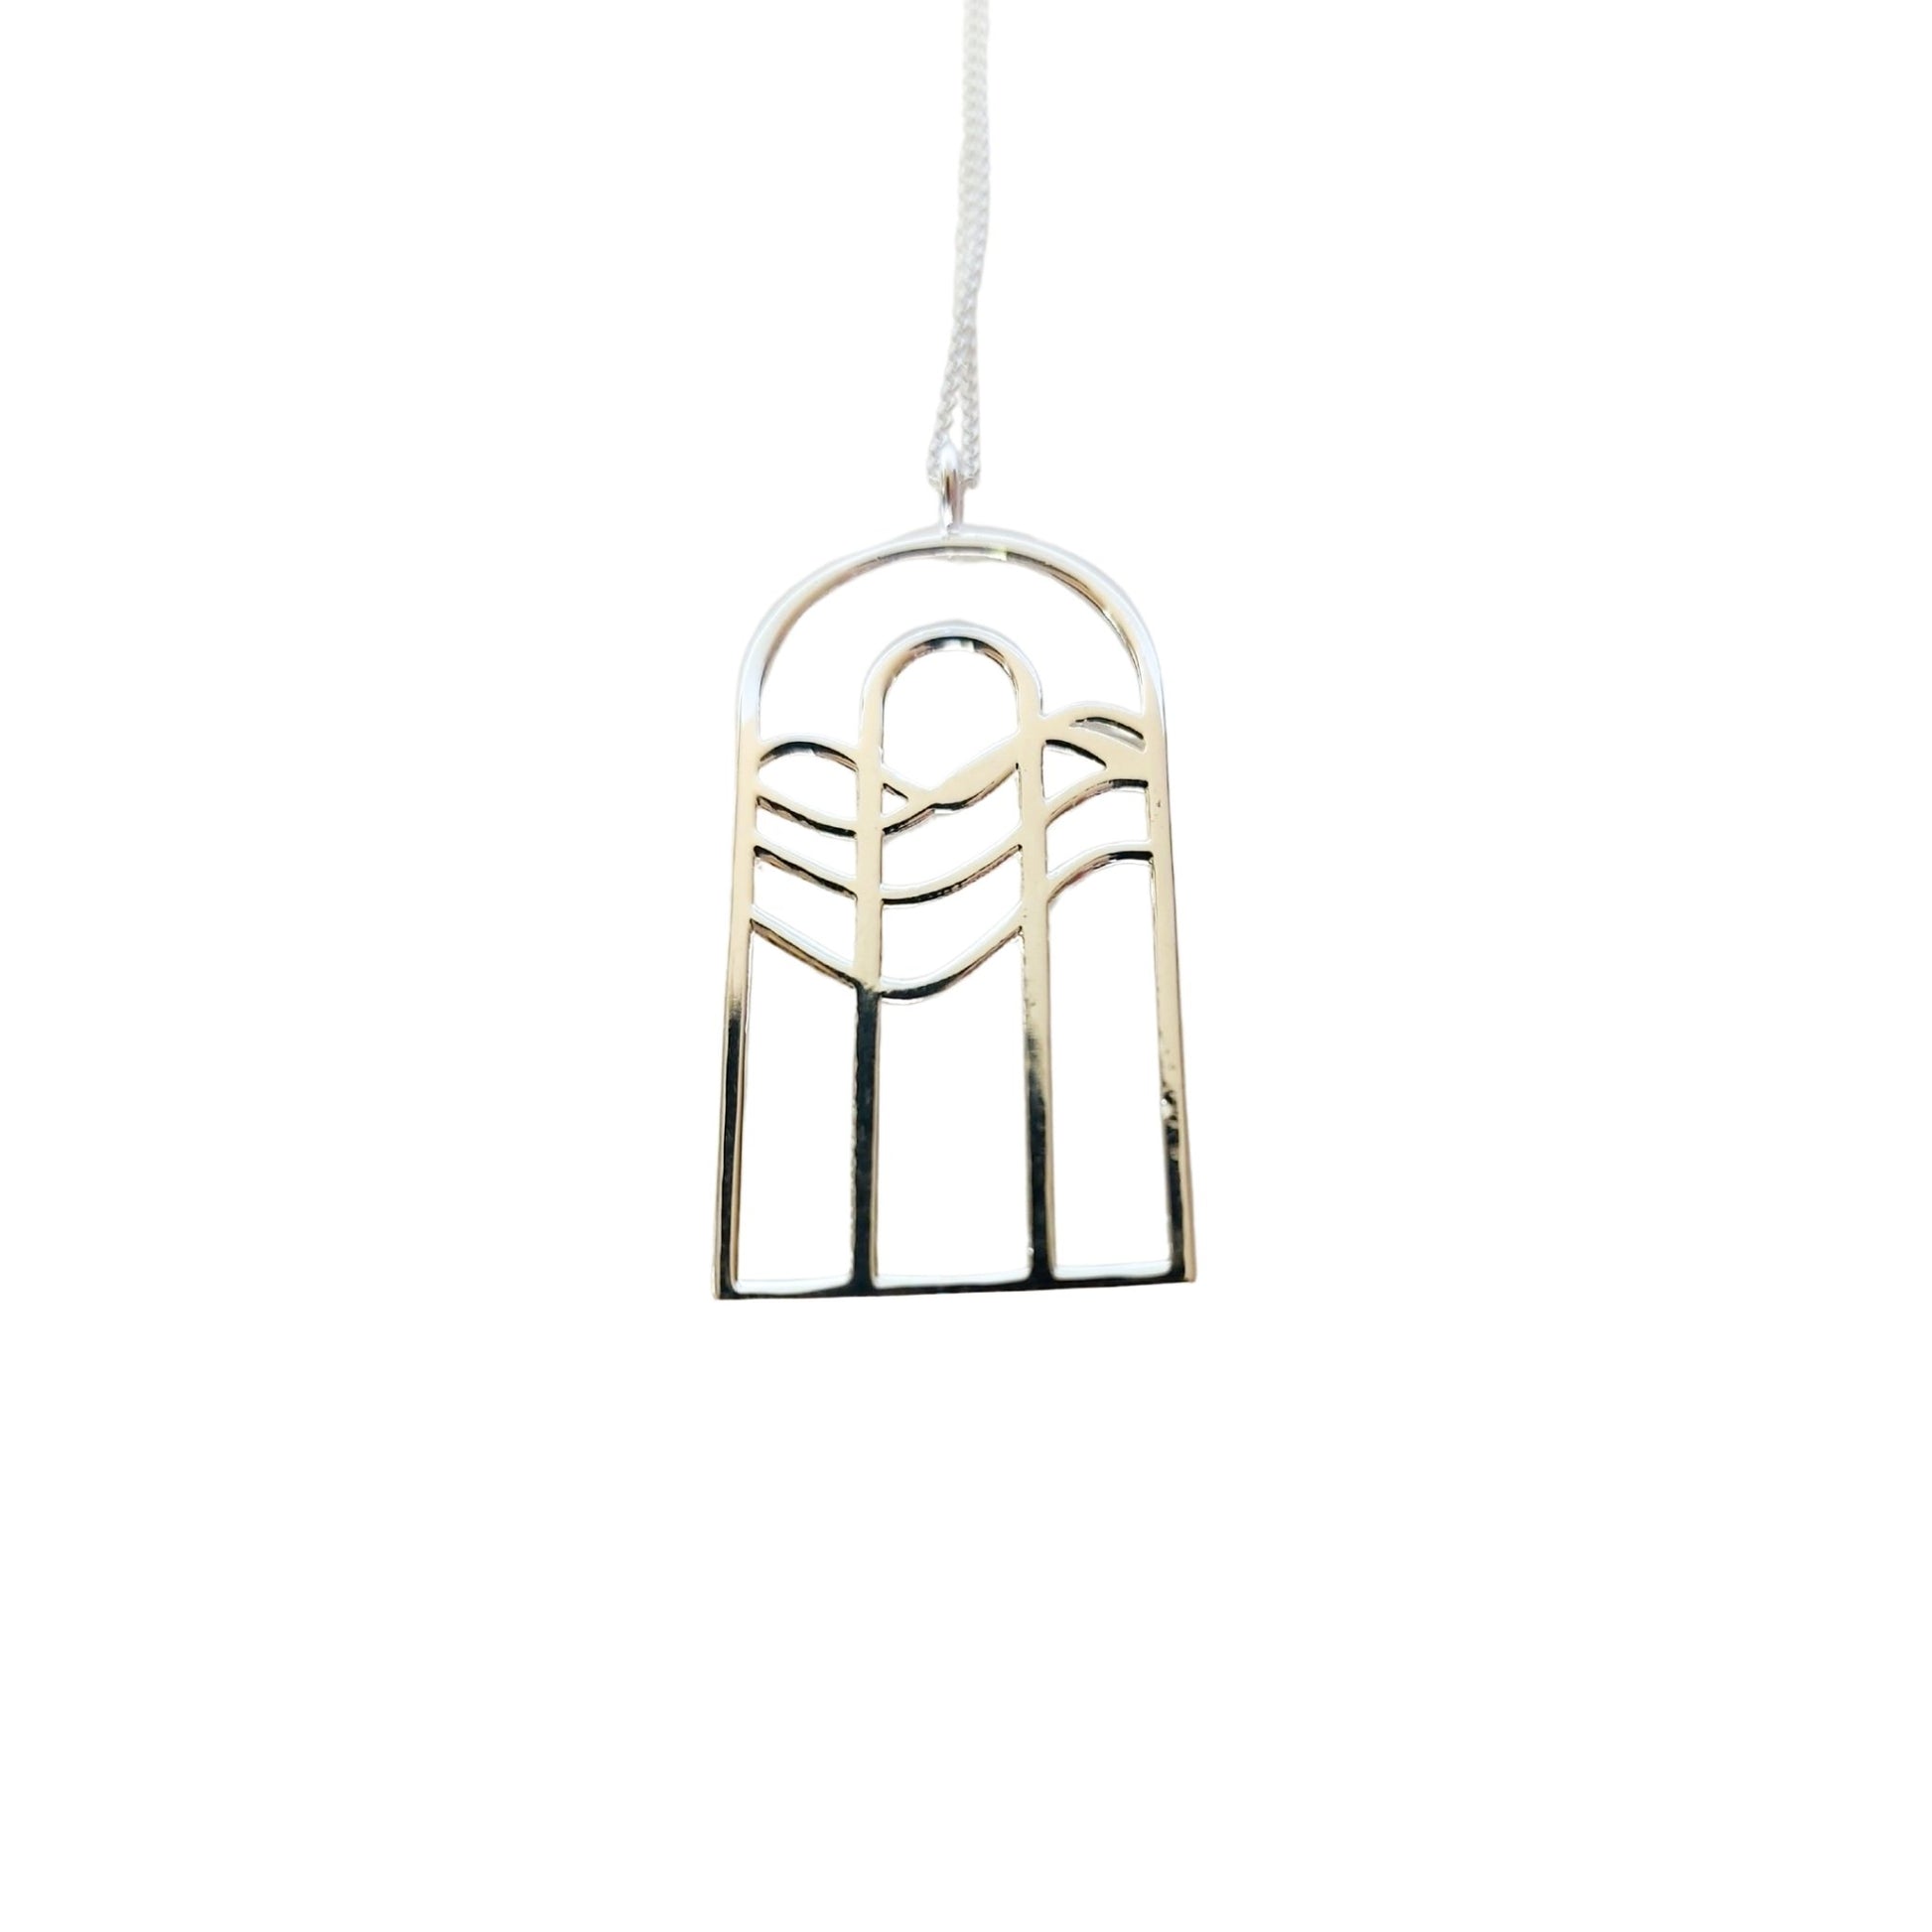 Silver necklace with rainbow water design that resembles cathedral window 2